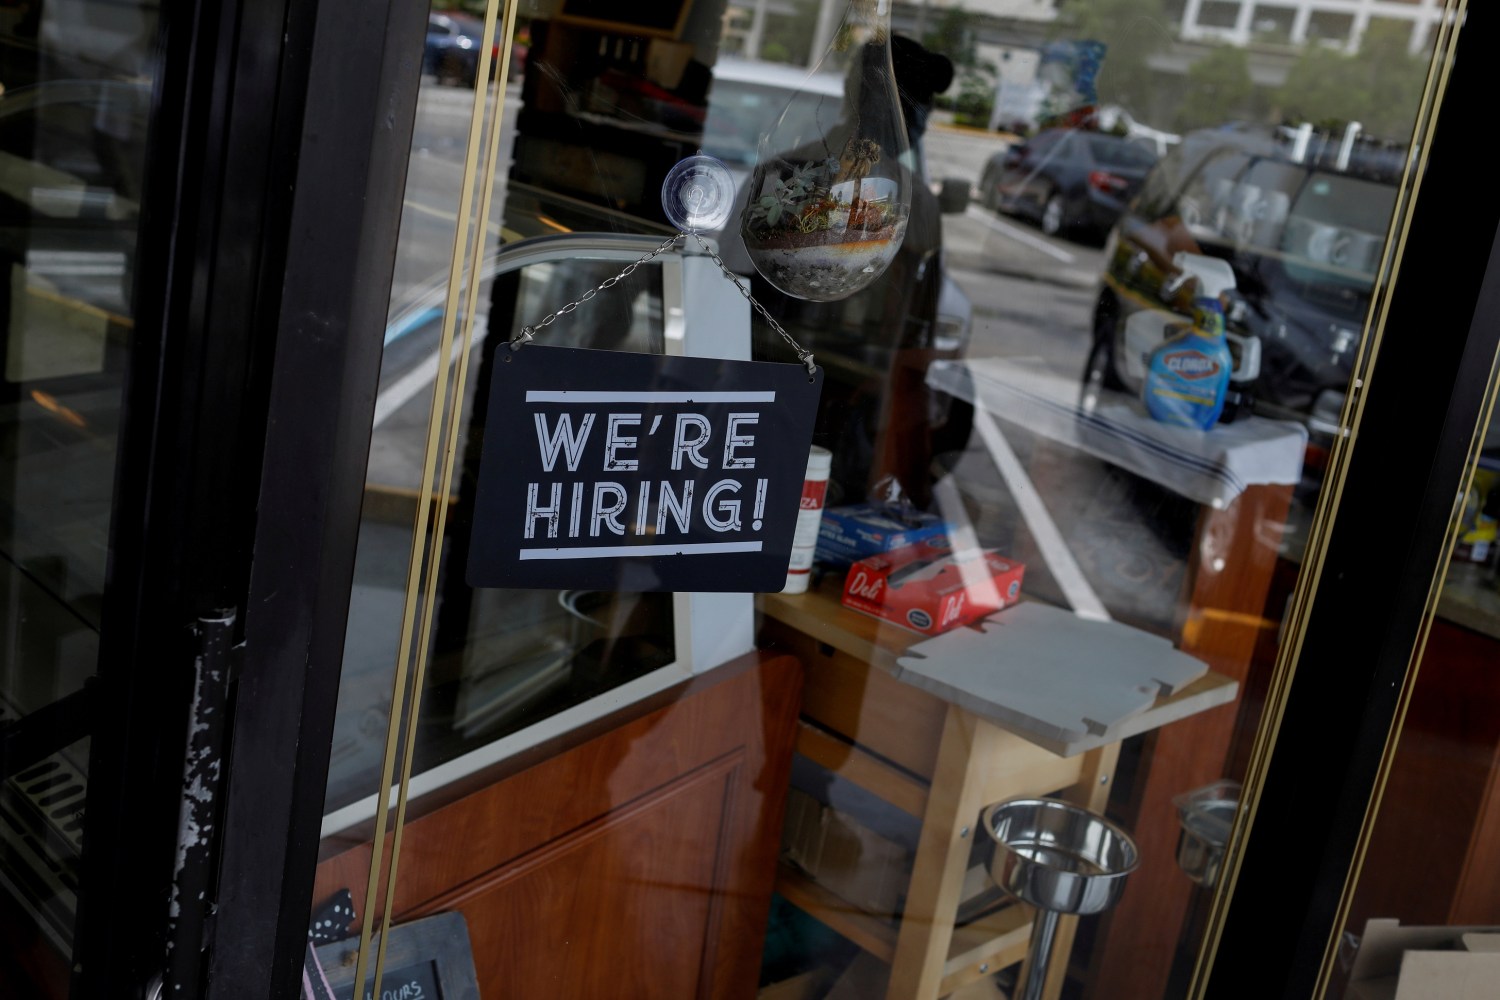 FILE PHOTO: A "We're Hiring" sign advertising jobs is seen at the entrance of a restaurant in Miami, Florida, U.S., May 18, 2020. REUTERS/Marco Bello/File Photo